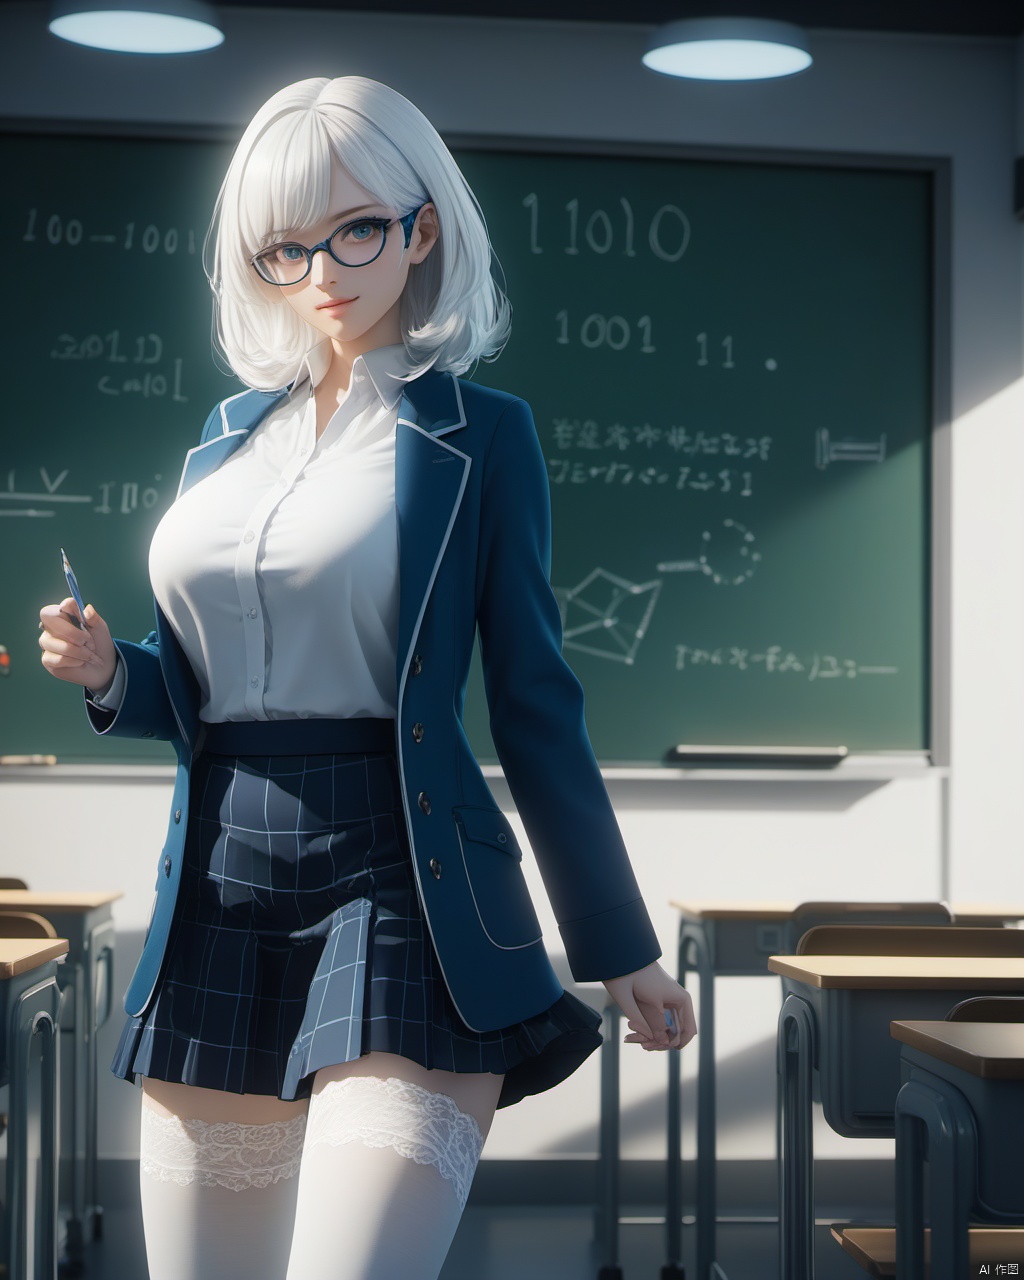  masterpiece, best quality, delicate face, cybernetic,pretty cyborg girl, coat,white shirt, skirt, white lace thighhighs, interior, teacher, classroom, chalkboard with word" 110011010111100111", smile, glasses, perfect figure, Slim figure,white hair, big breasts, chest tightness, backlight, first-class, low key,blue cold theme, bright and colorful tones, 3D, high resolution, 1 girl, gorgeously dressed, transparent,sweater,printlegwear,bokeh,刘诗诗